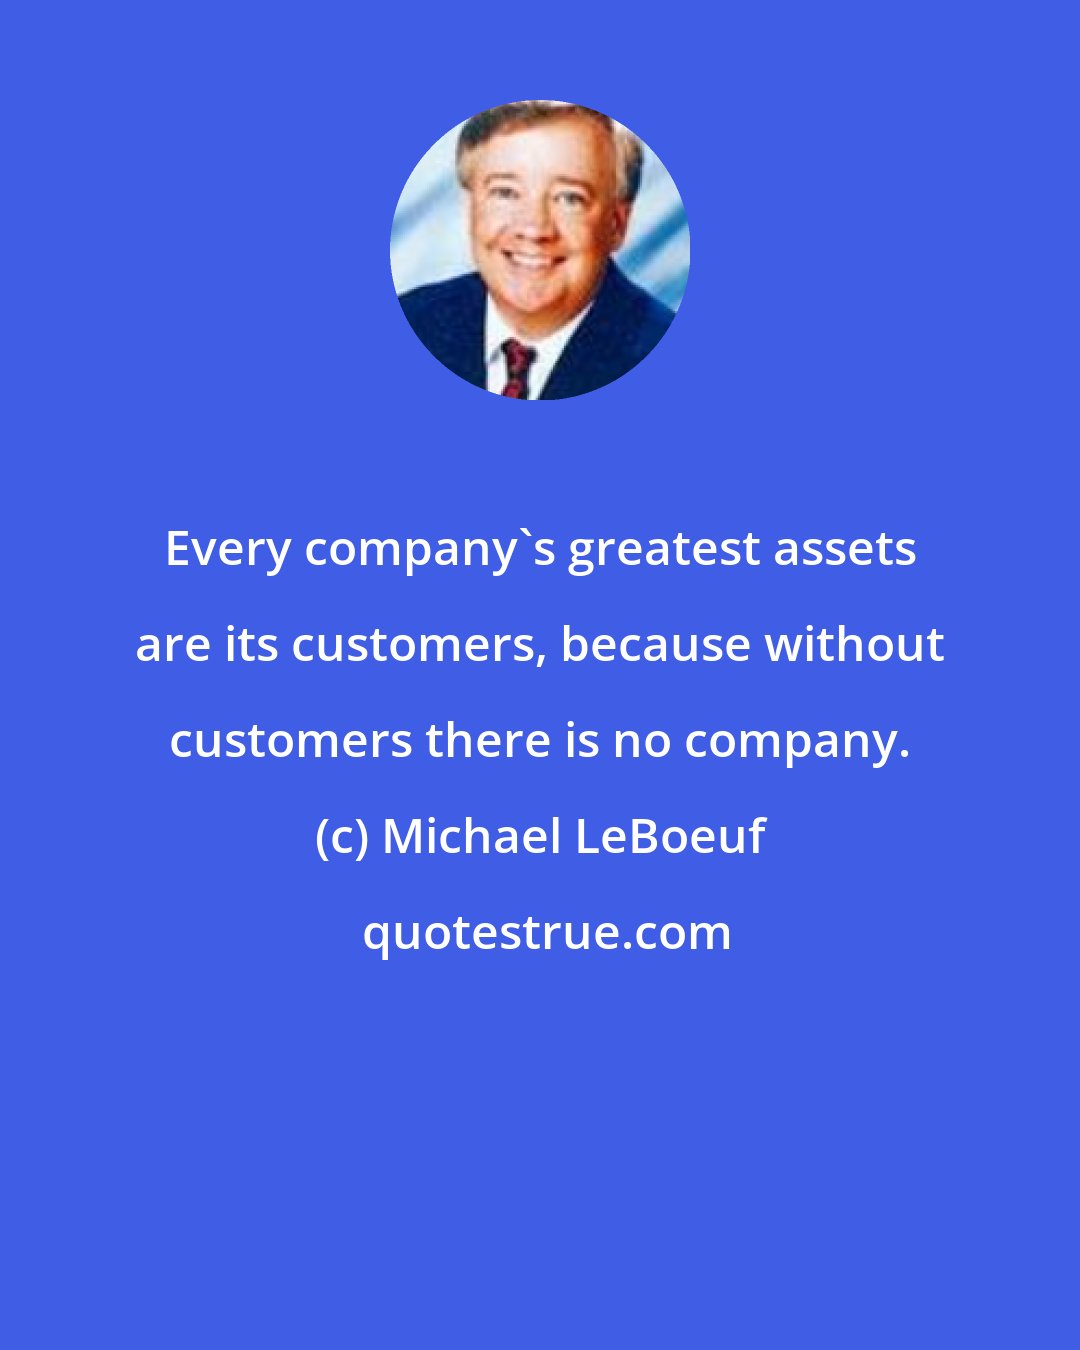 Michael LeBoeuf: Every company's greatest assets are its customers, because without customers there is no company.